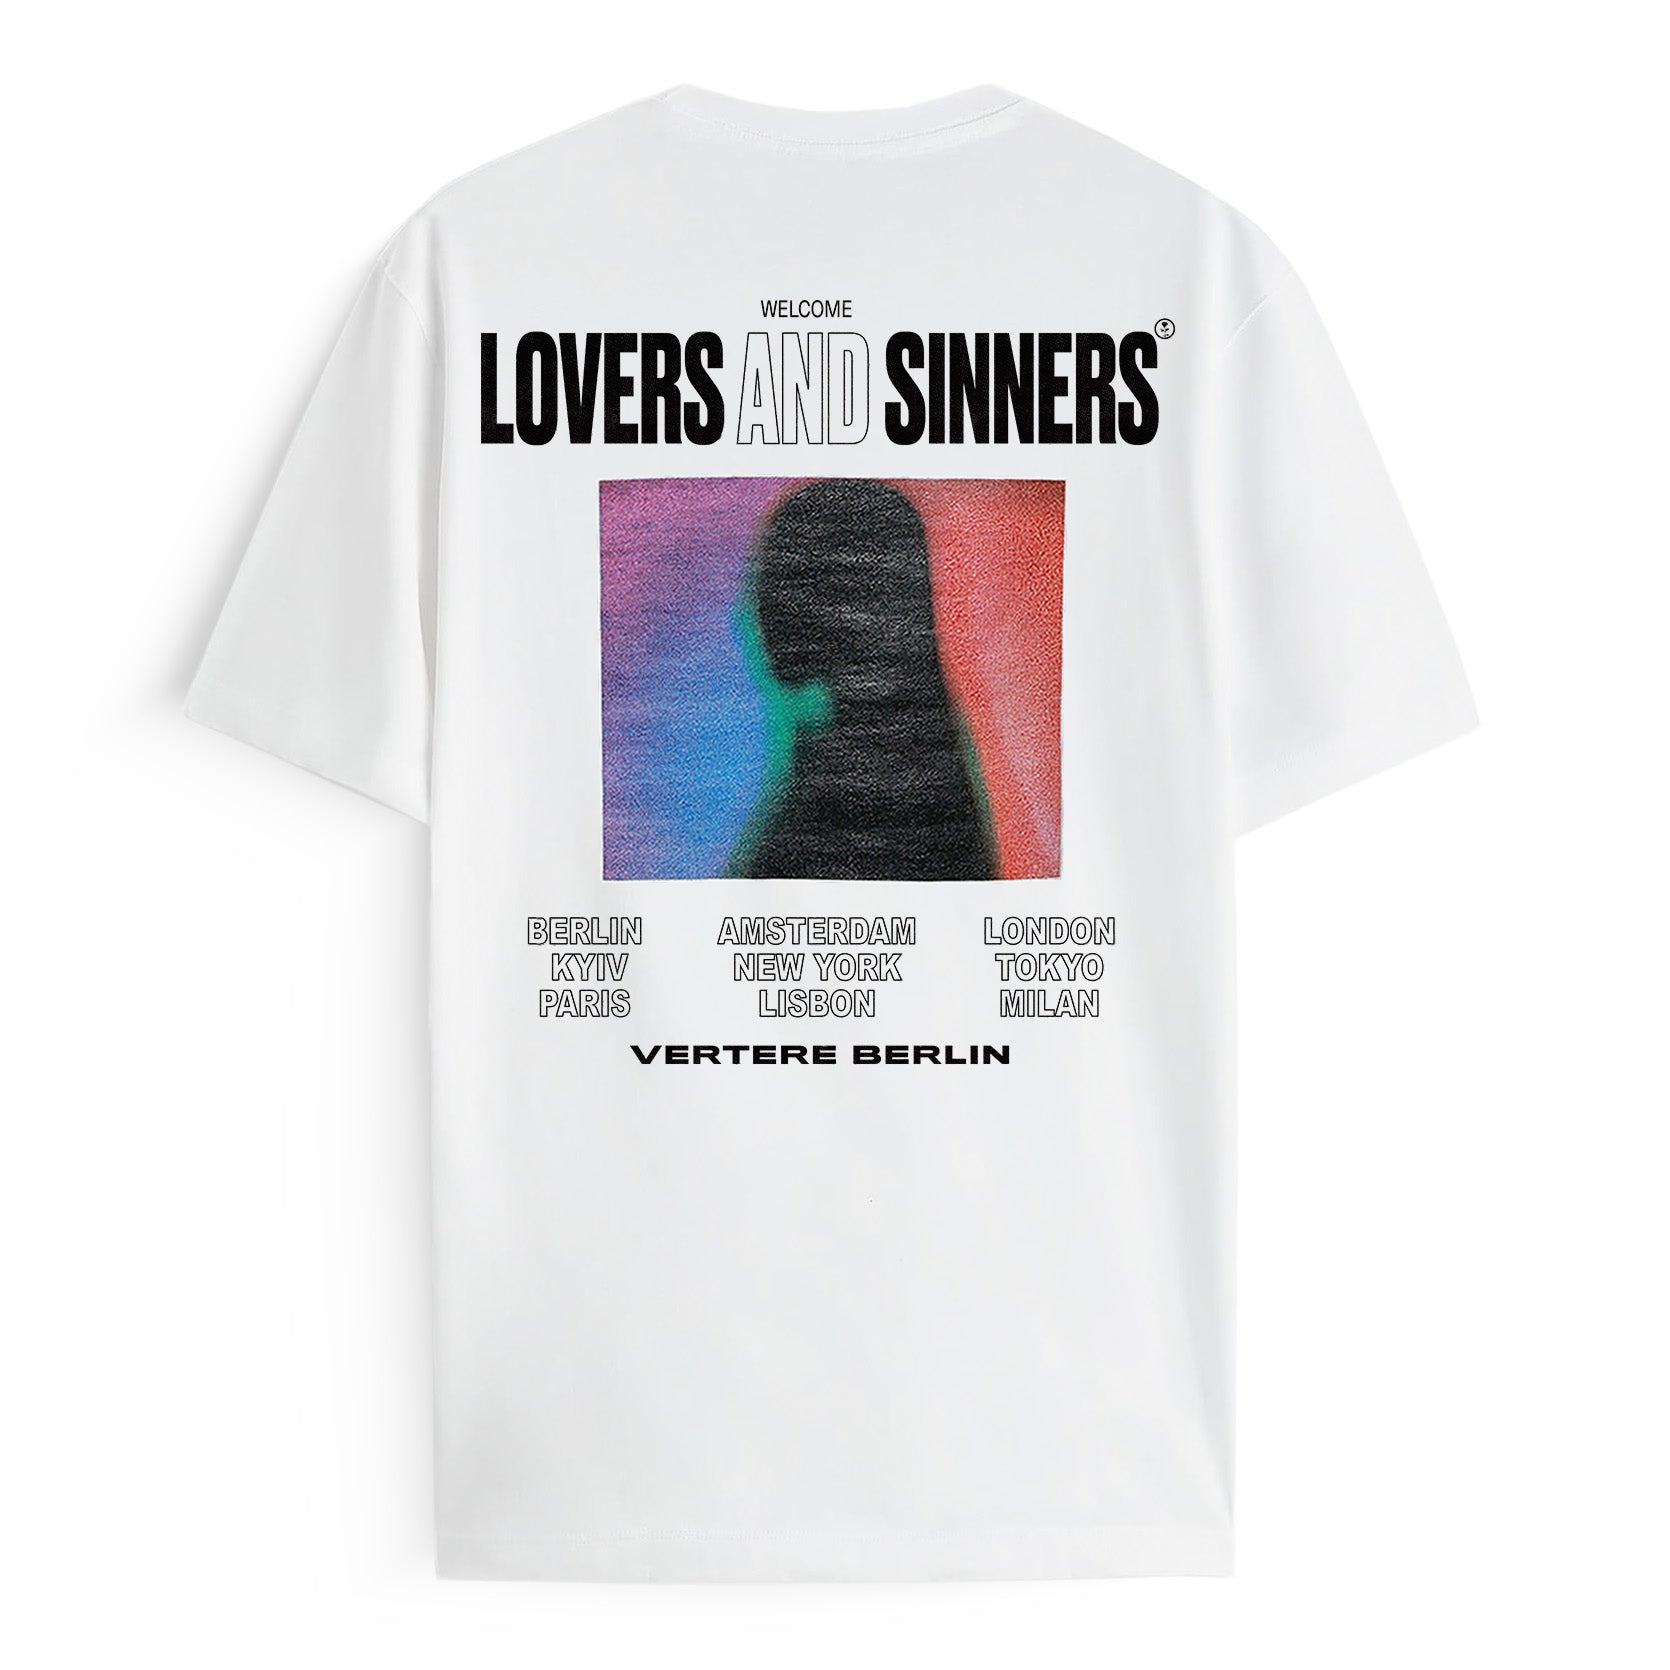 LOVERS AND SINNERS T-SHIRT - WHITE